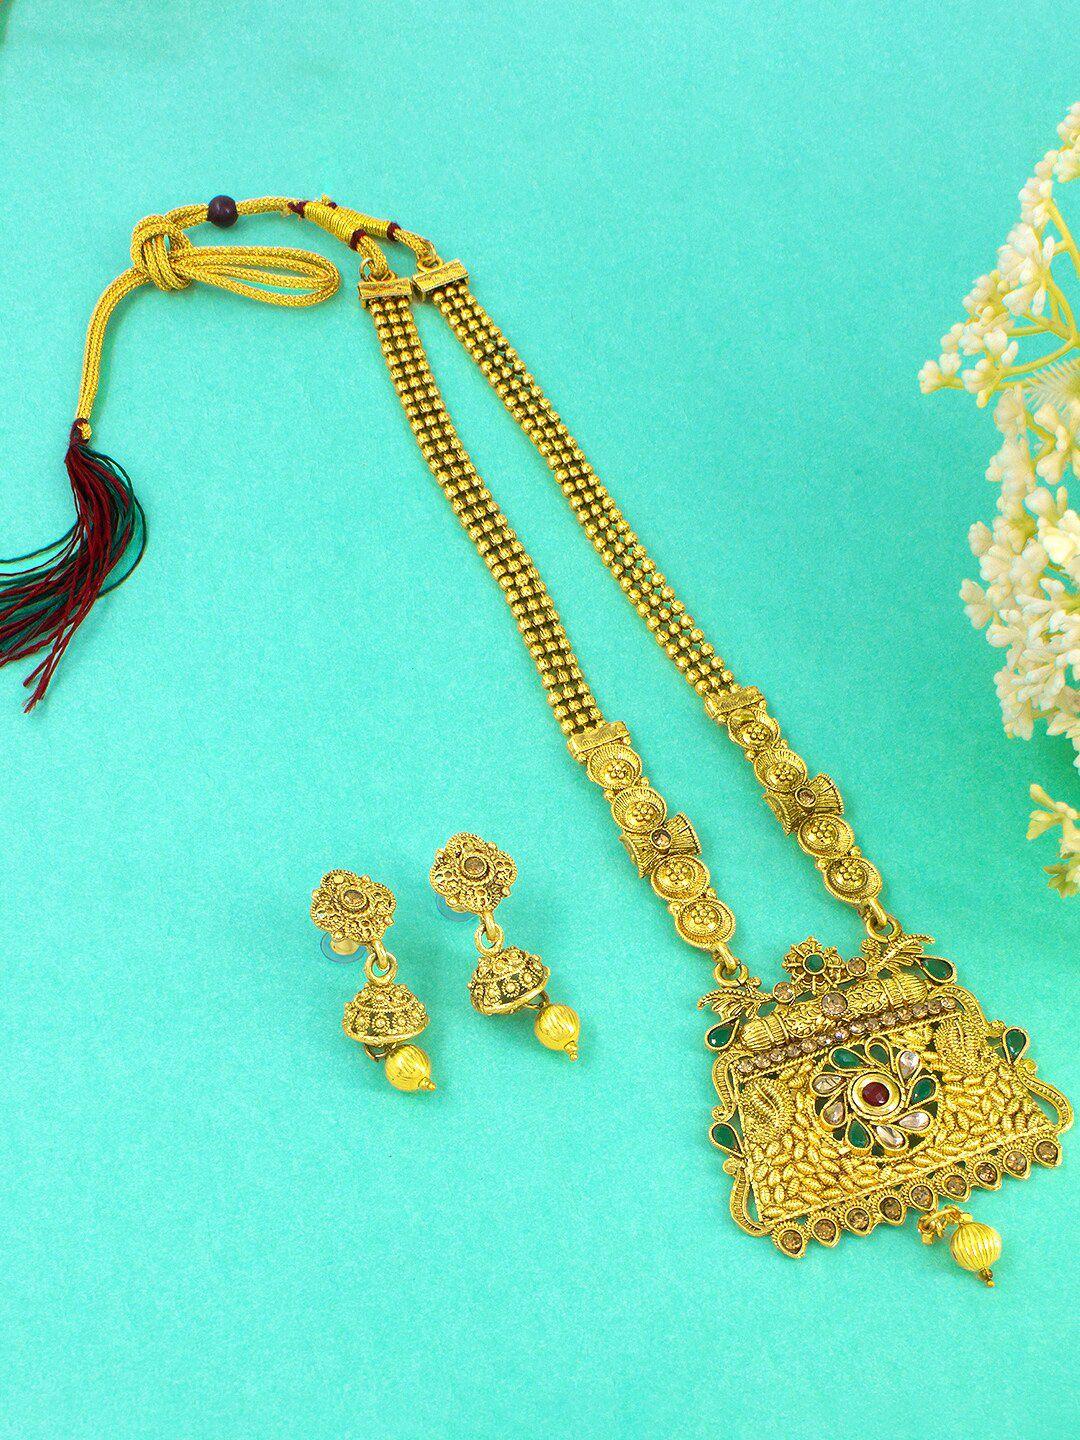 priviu 22kt gold-plated stone-studded & beaded temple jewellery set